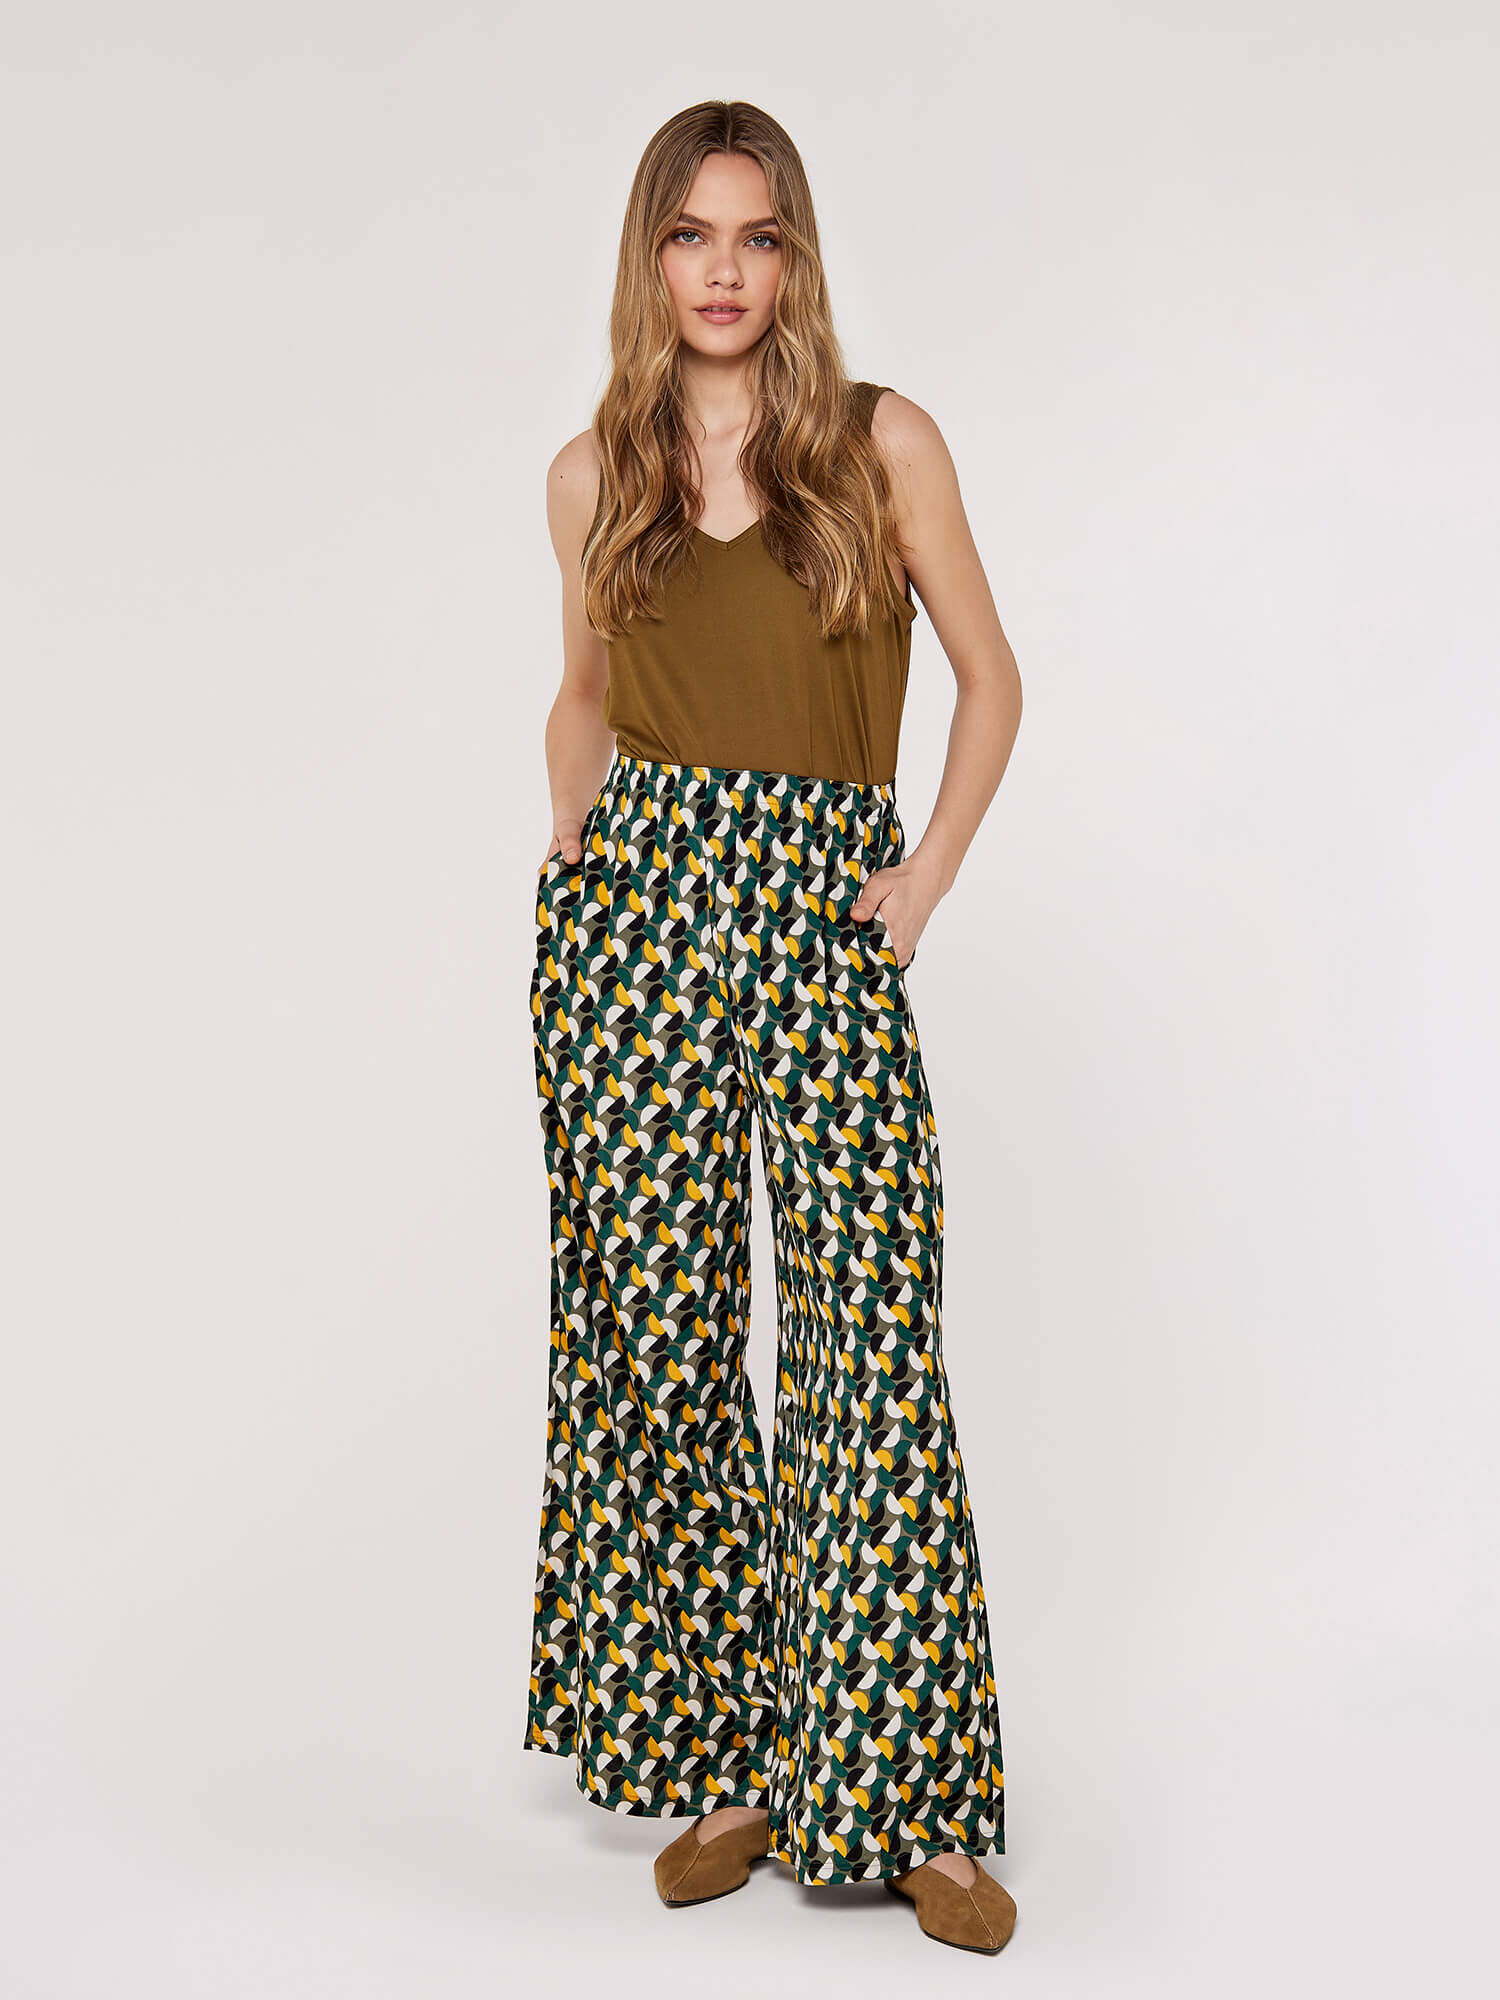 Patterned trousers - Black/Spotted - Ladies | H&M IN